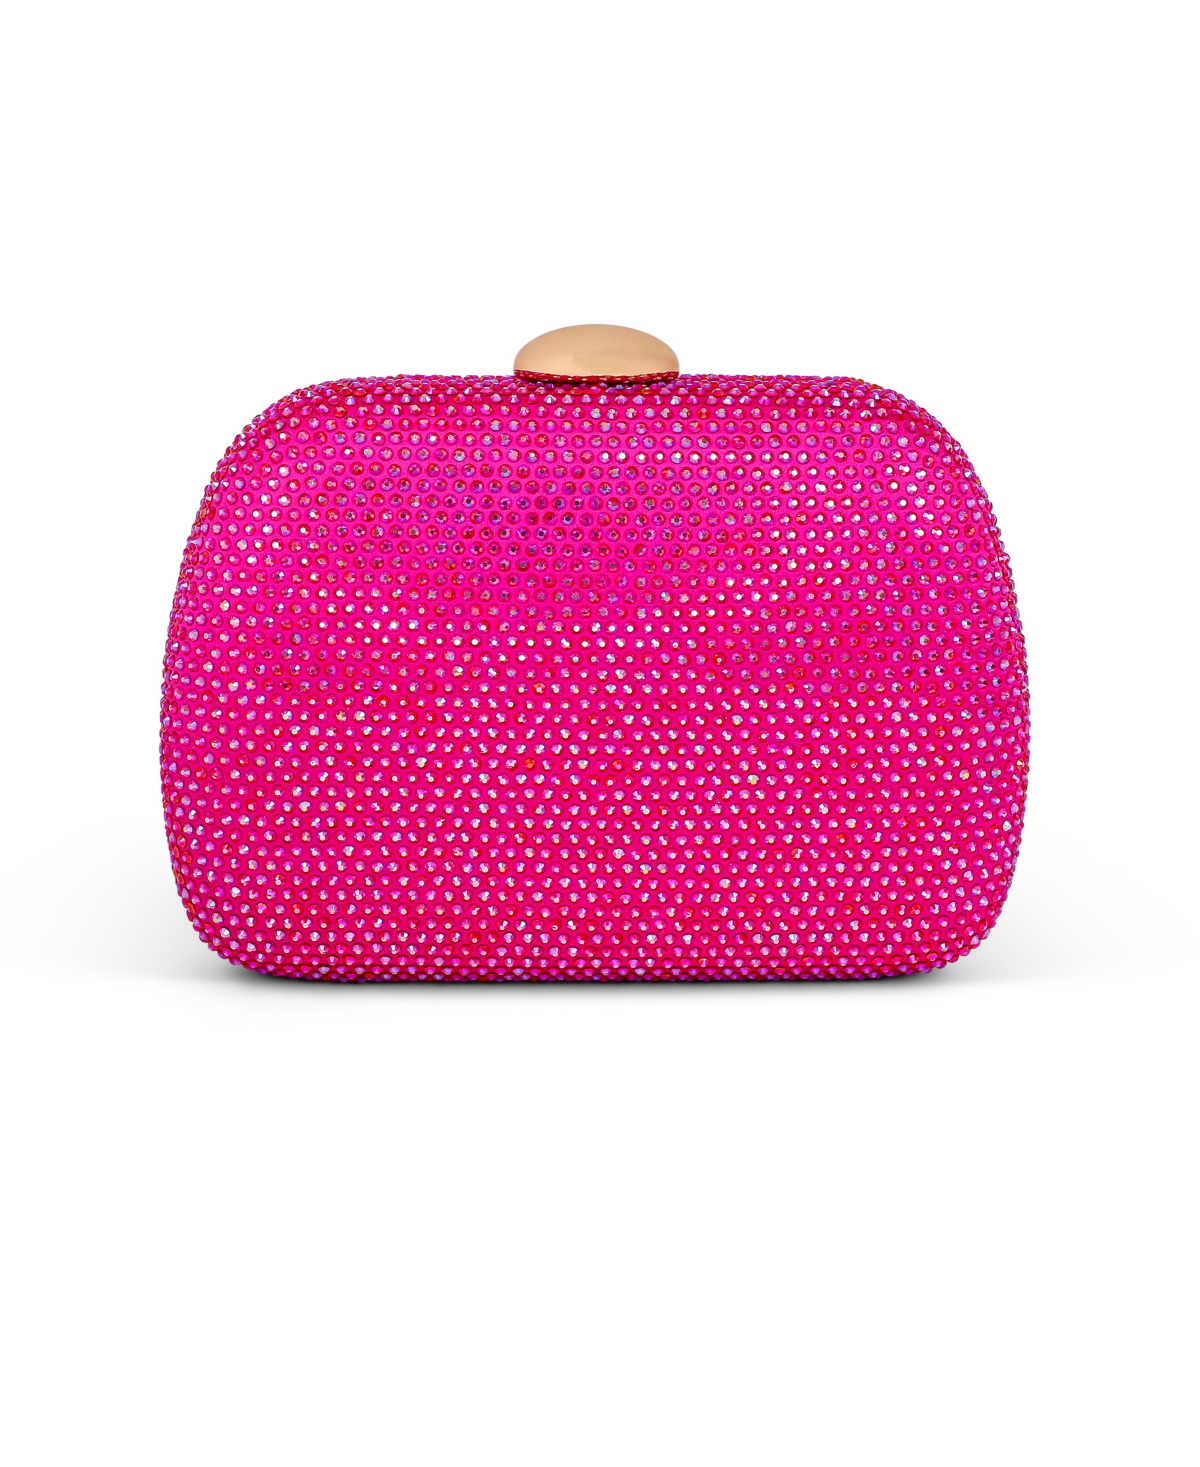 Woman's Blossom Crystal Minaudiere - Neon pink